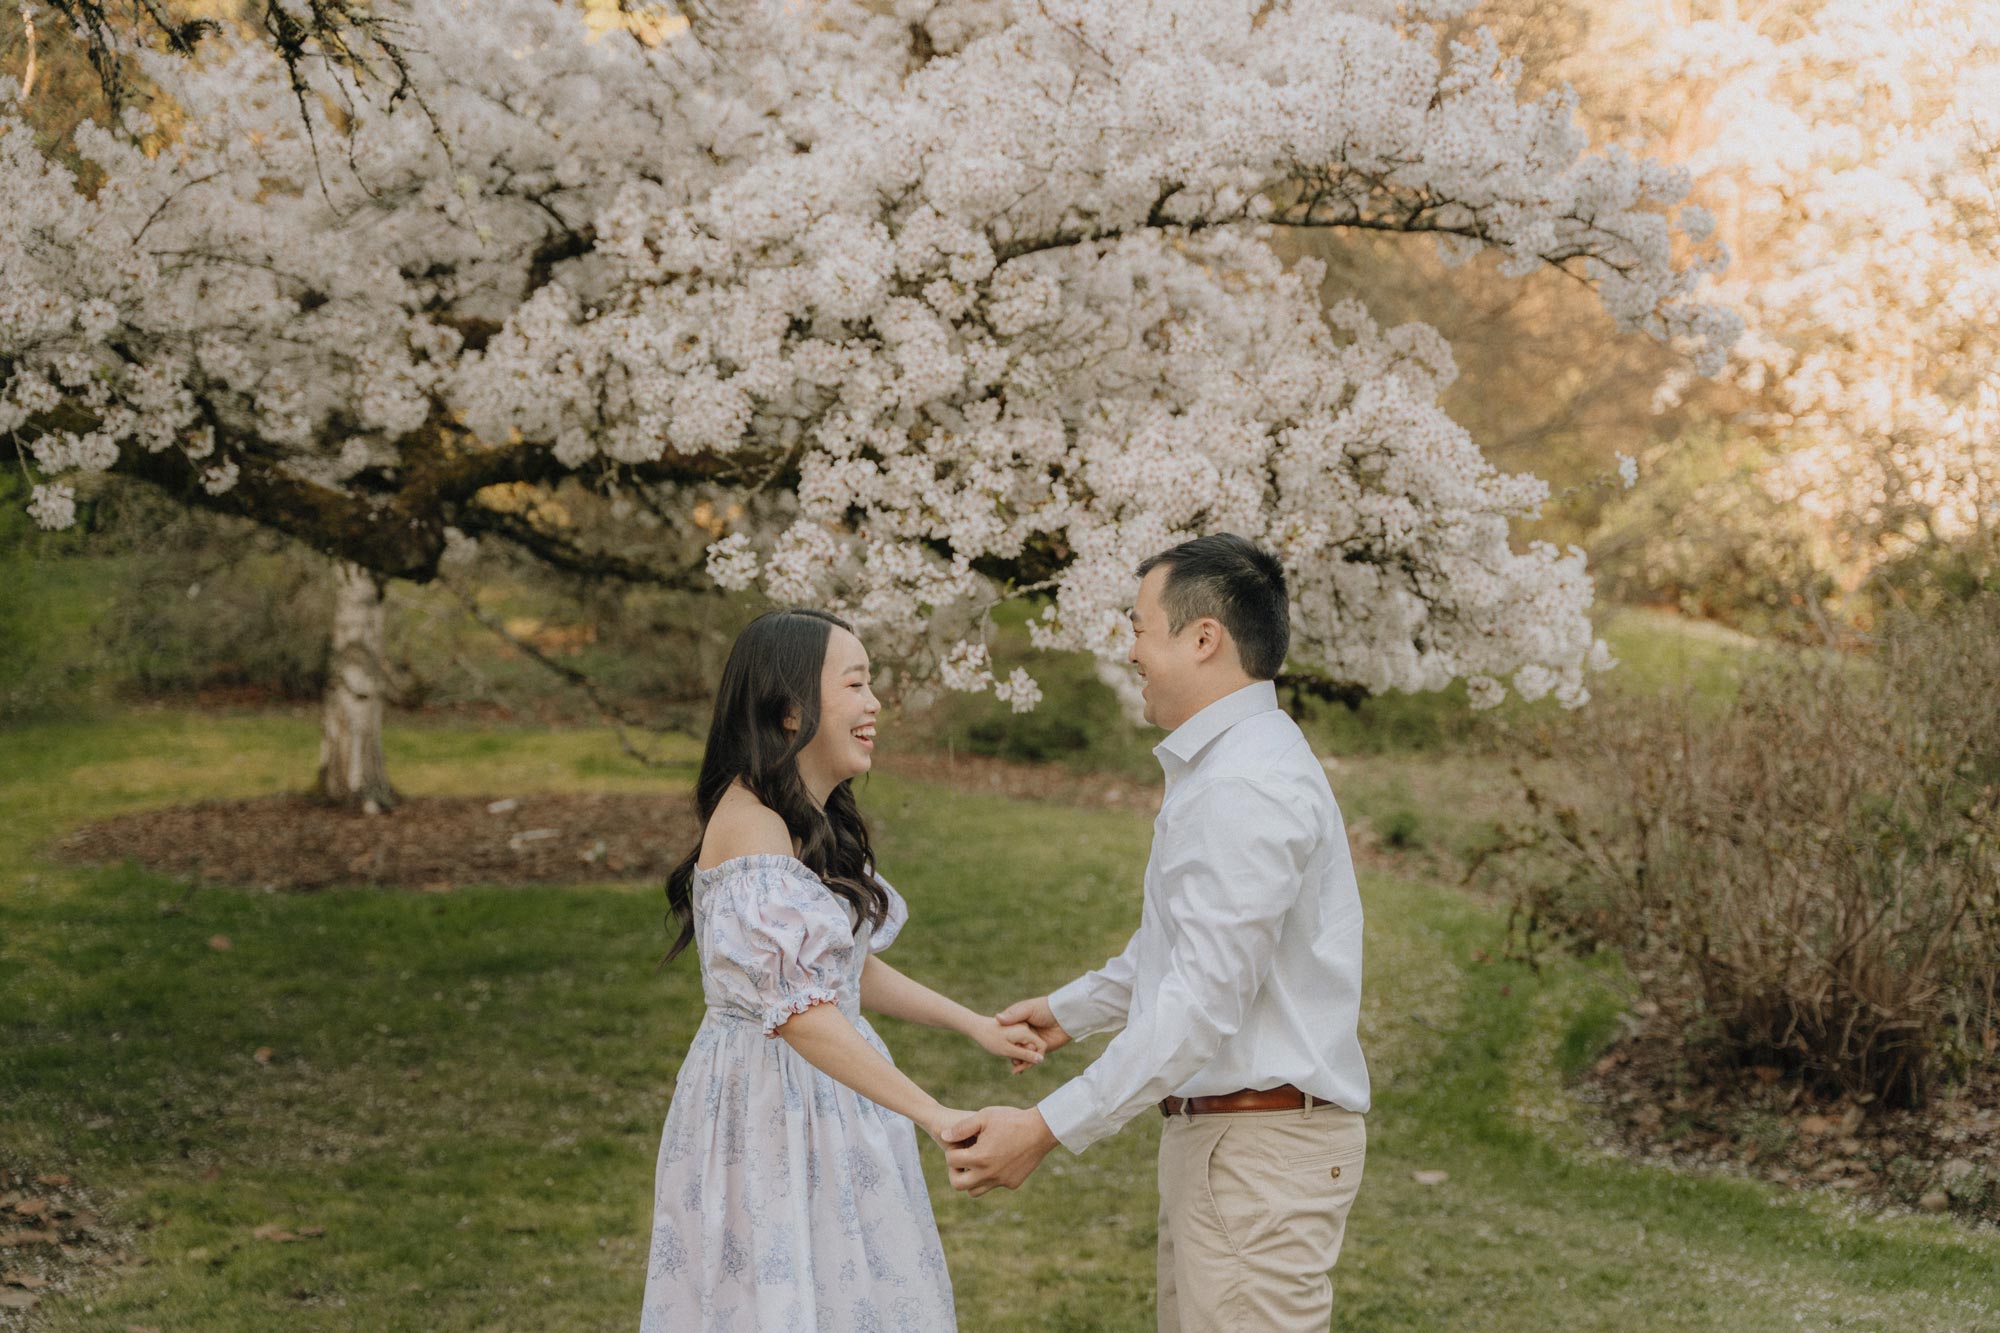 Couple holding hands and laughing at each other while smiling underneath a cherry blossom tree.